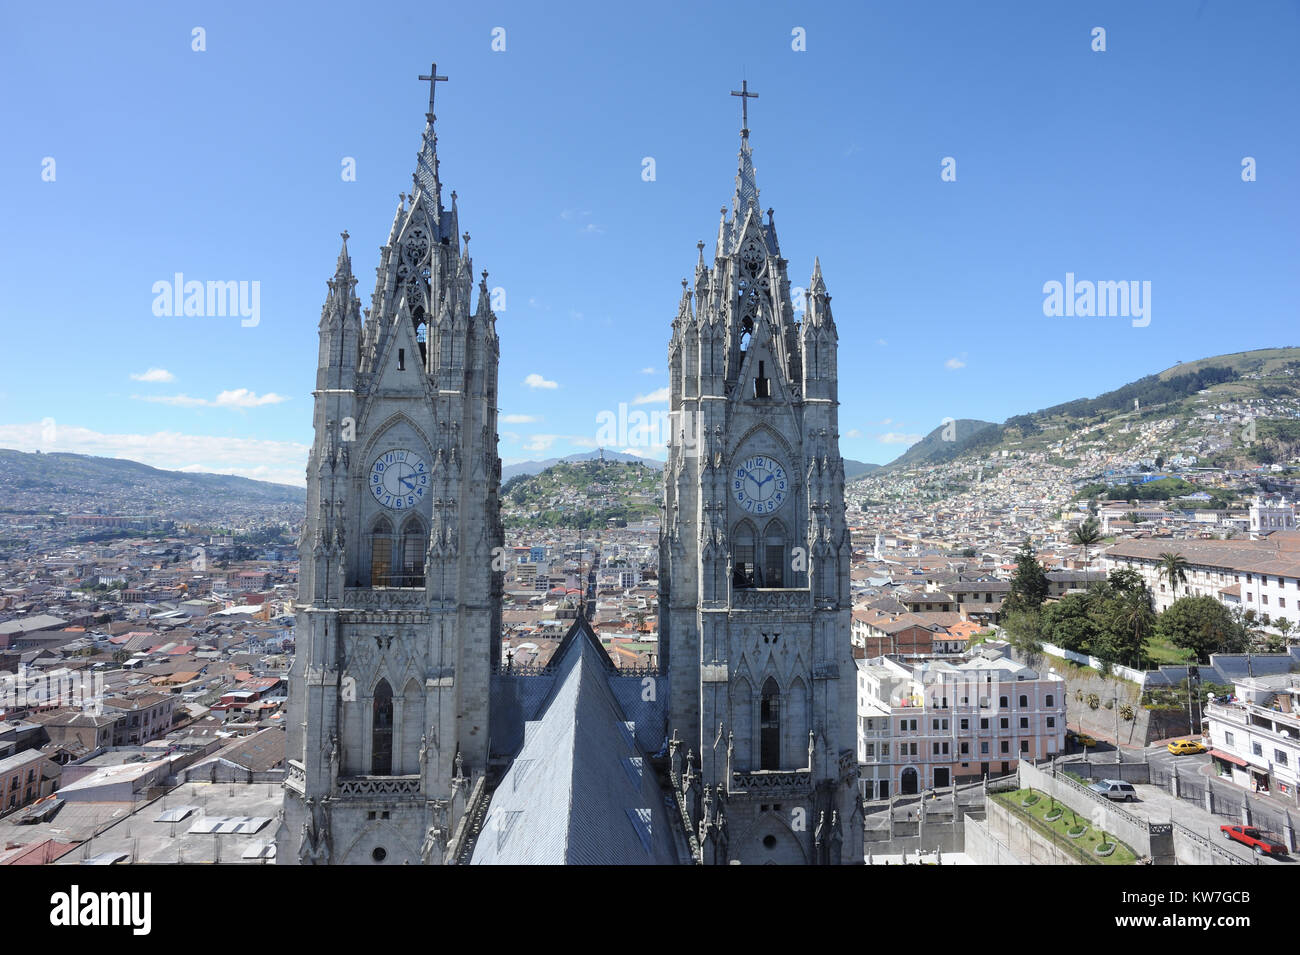 The south towers and roof of the Basílica del Voto Nacional. The centre of Quito is in the background.  The basilica was built in the twentieth centur Stock Photo